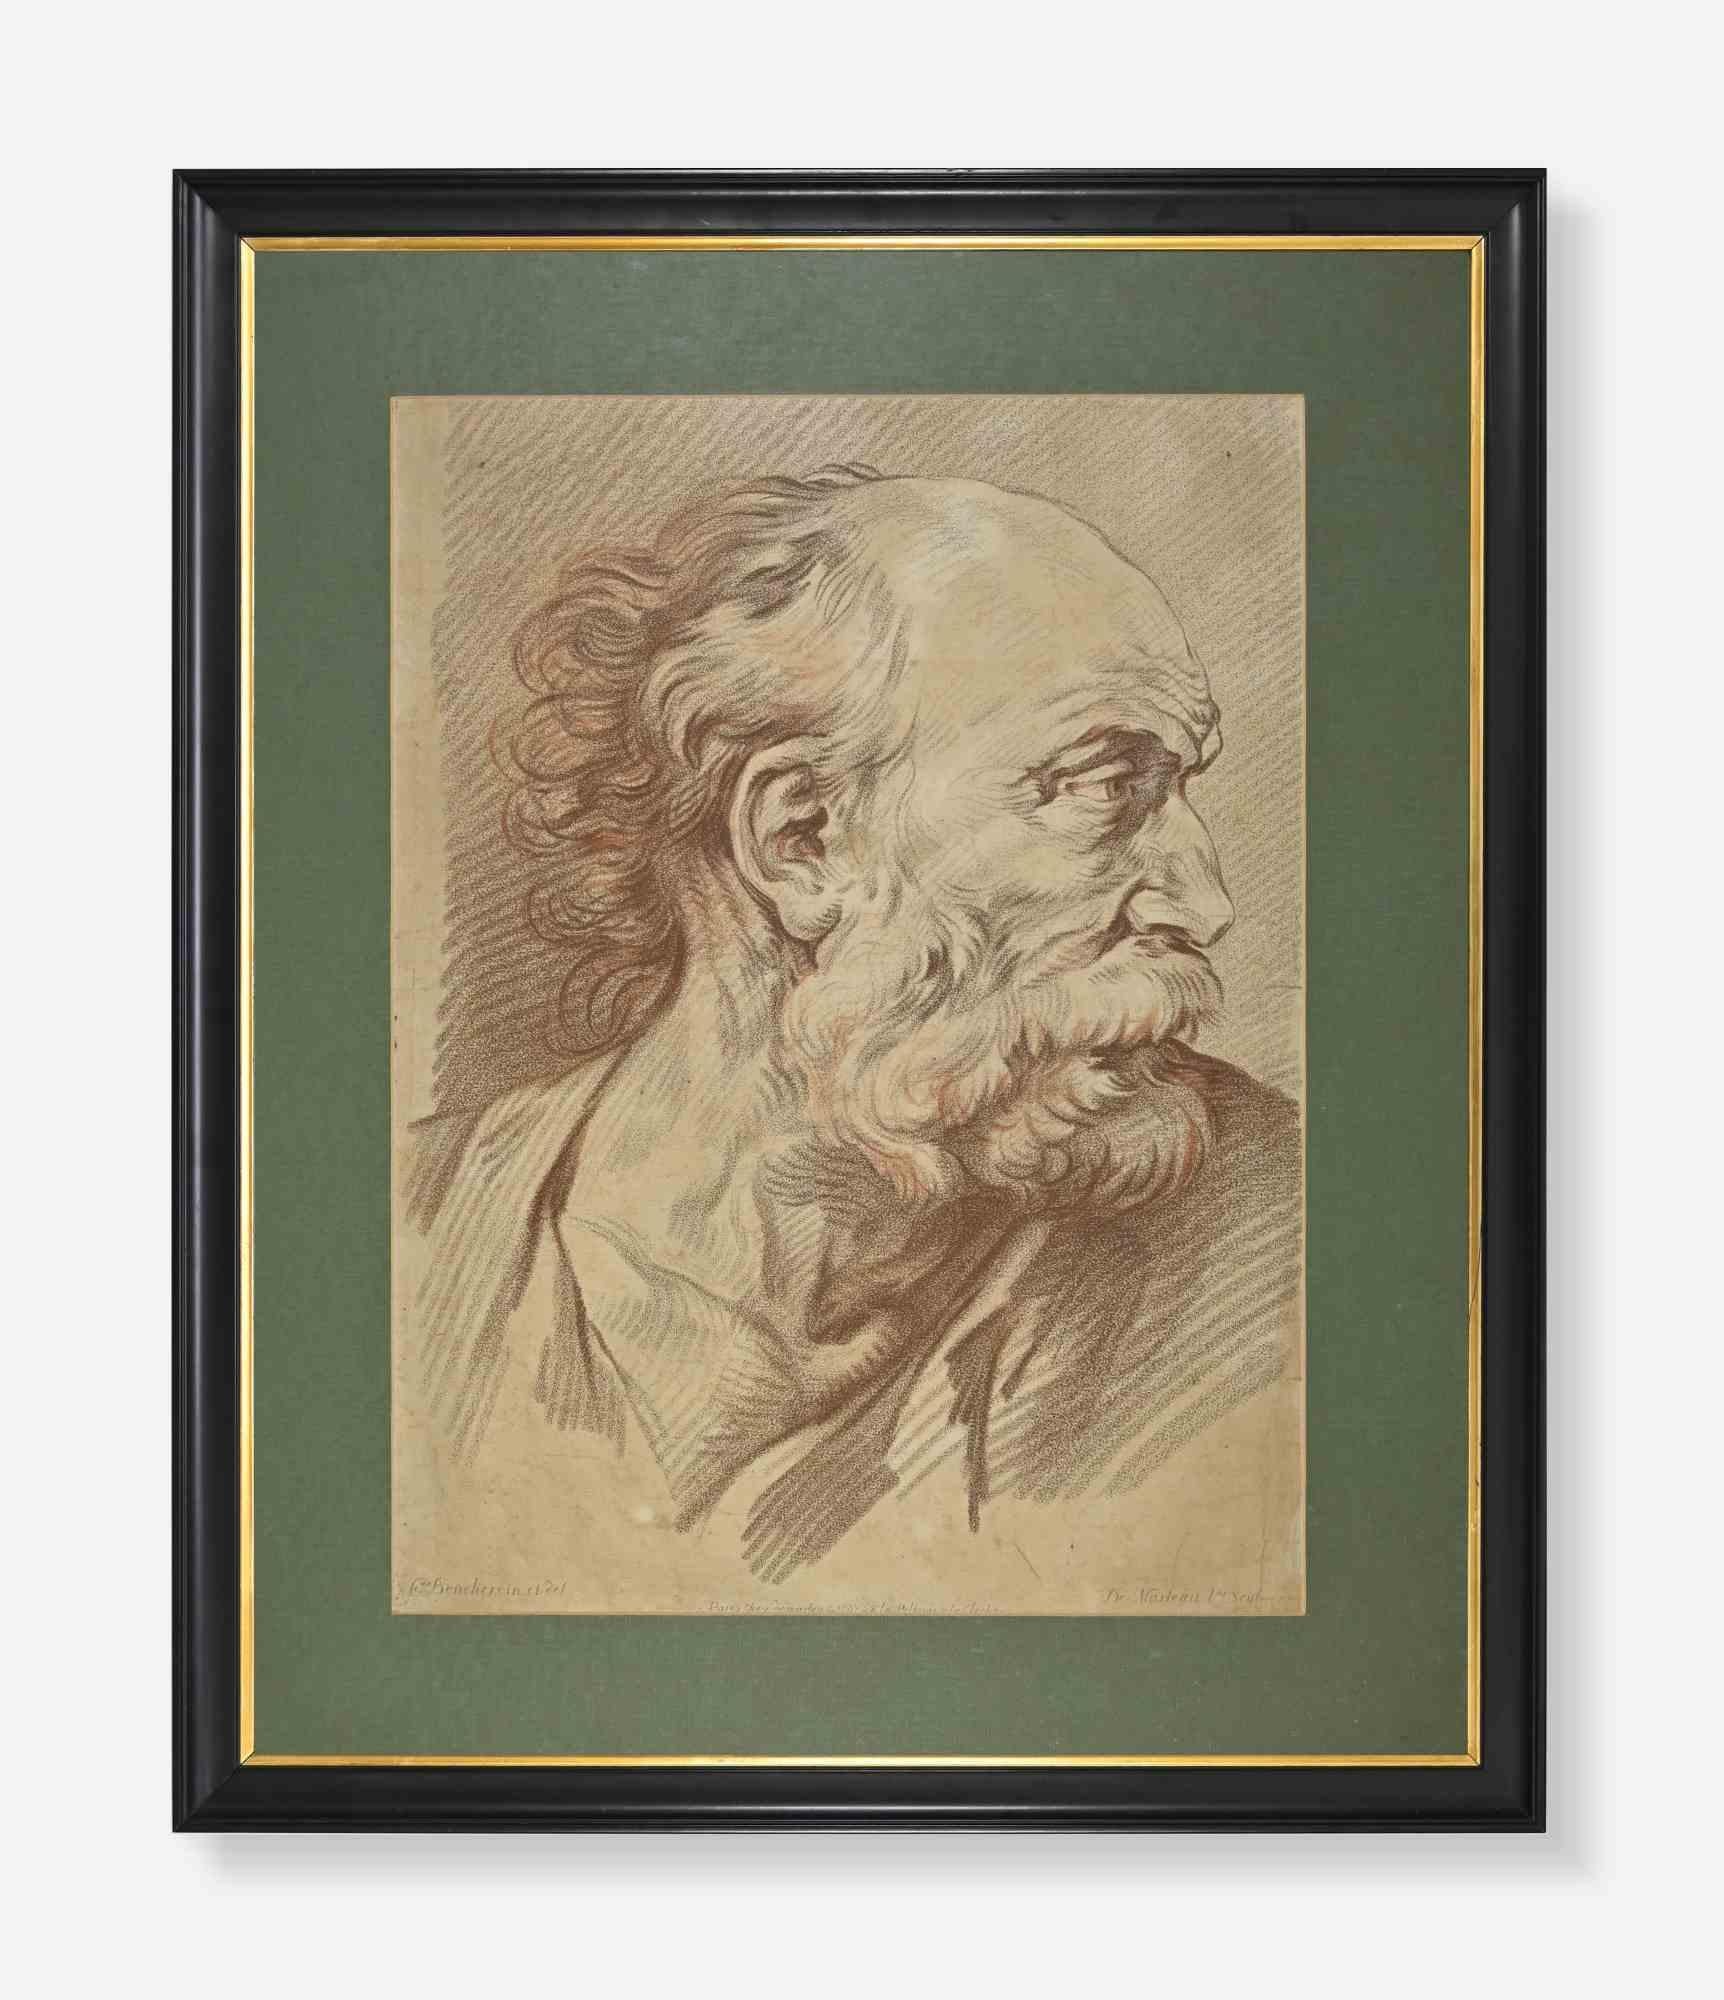 Portrait of Man is an old master artwork realized by Gilles Demarteau in the mid-18th Century.

Crayon-manner engraving on paper.

Includes frame.

Inscription: At lower left: f. Boucher in. et del

                 At lower right: De Marteau lné